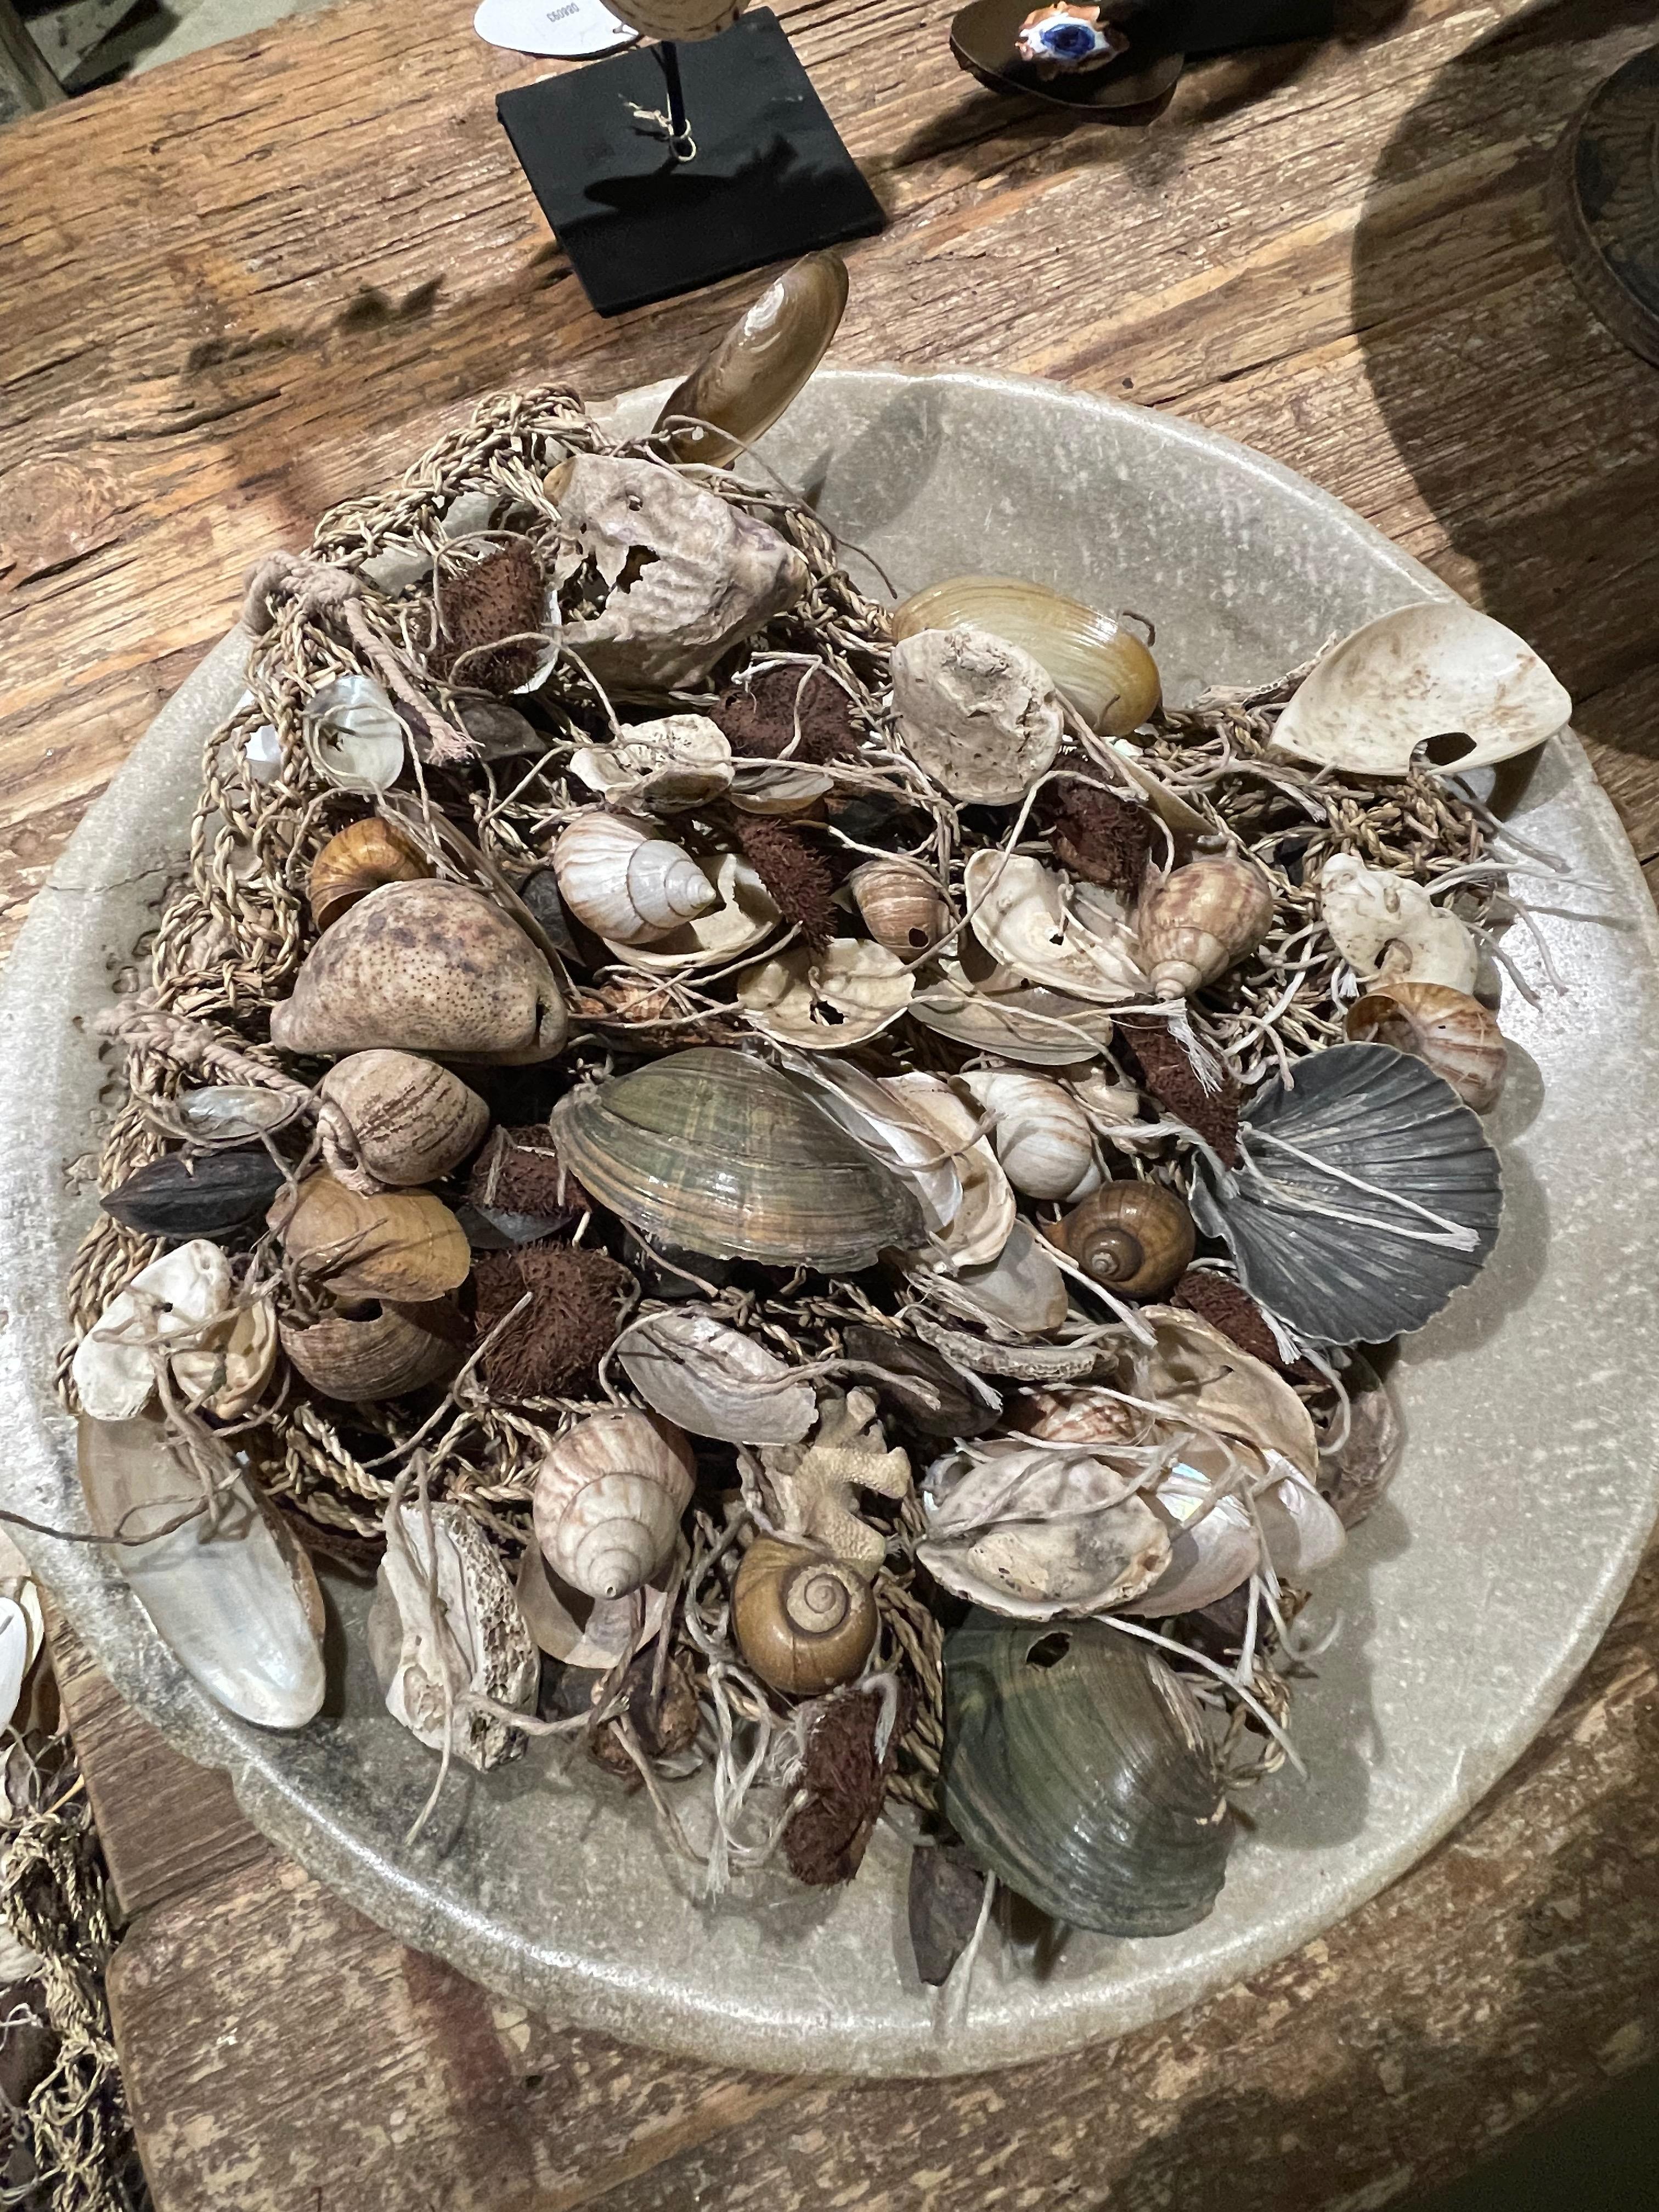 Contemporary Indonesian purse made of a multitude of different shells.
All connected by natural twine.
Very decorative placed in a bowl.
